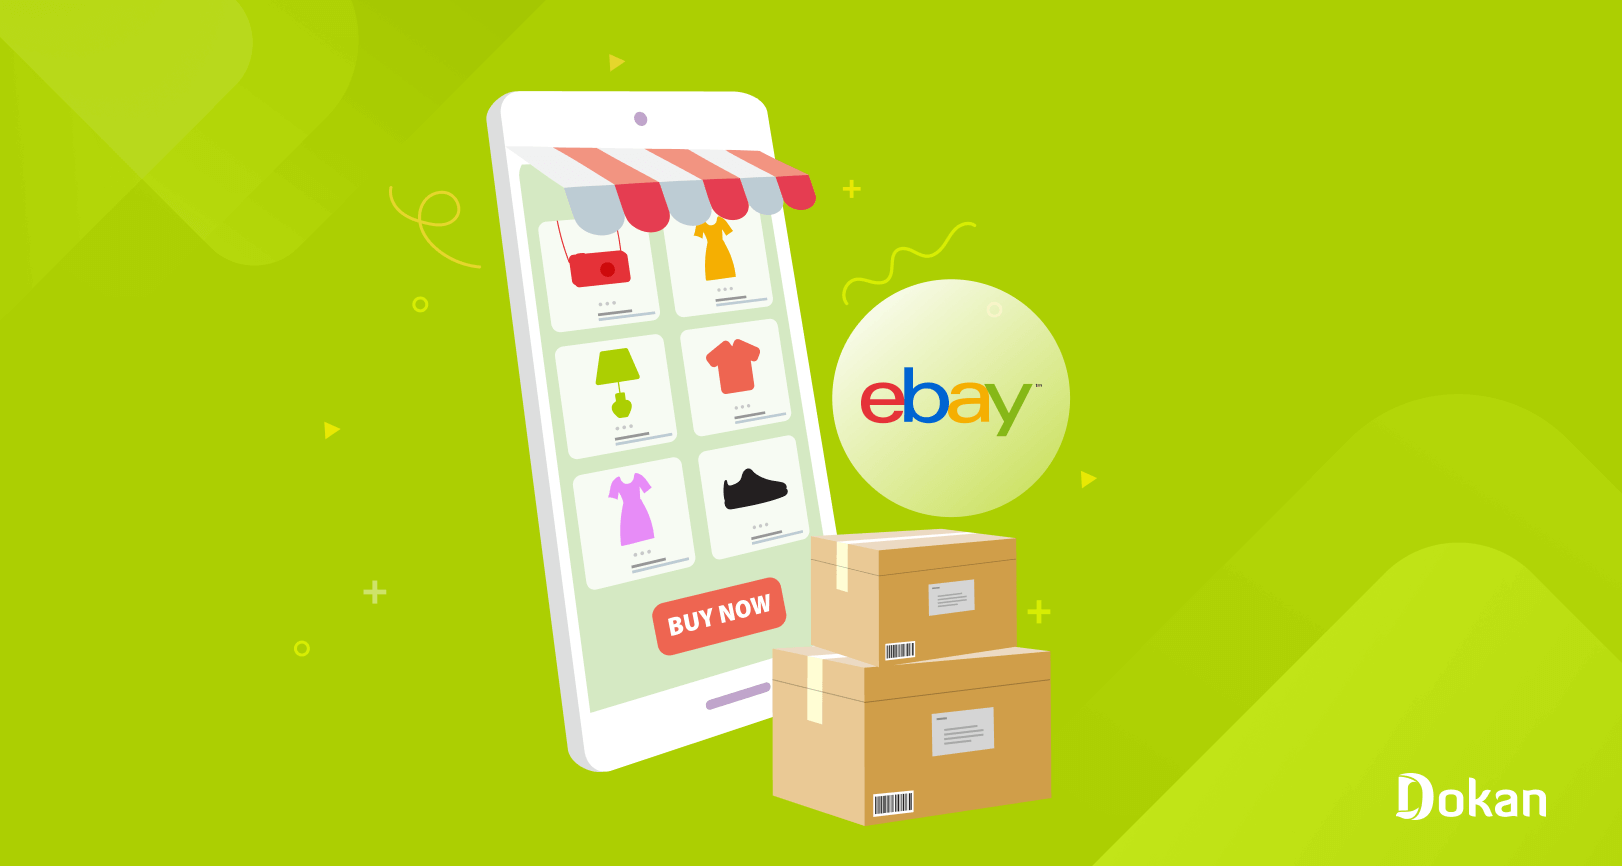 How to Create an Online Marketplace Like eBay